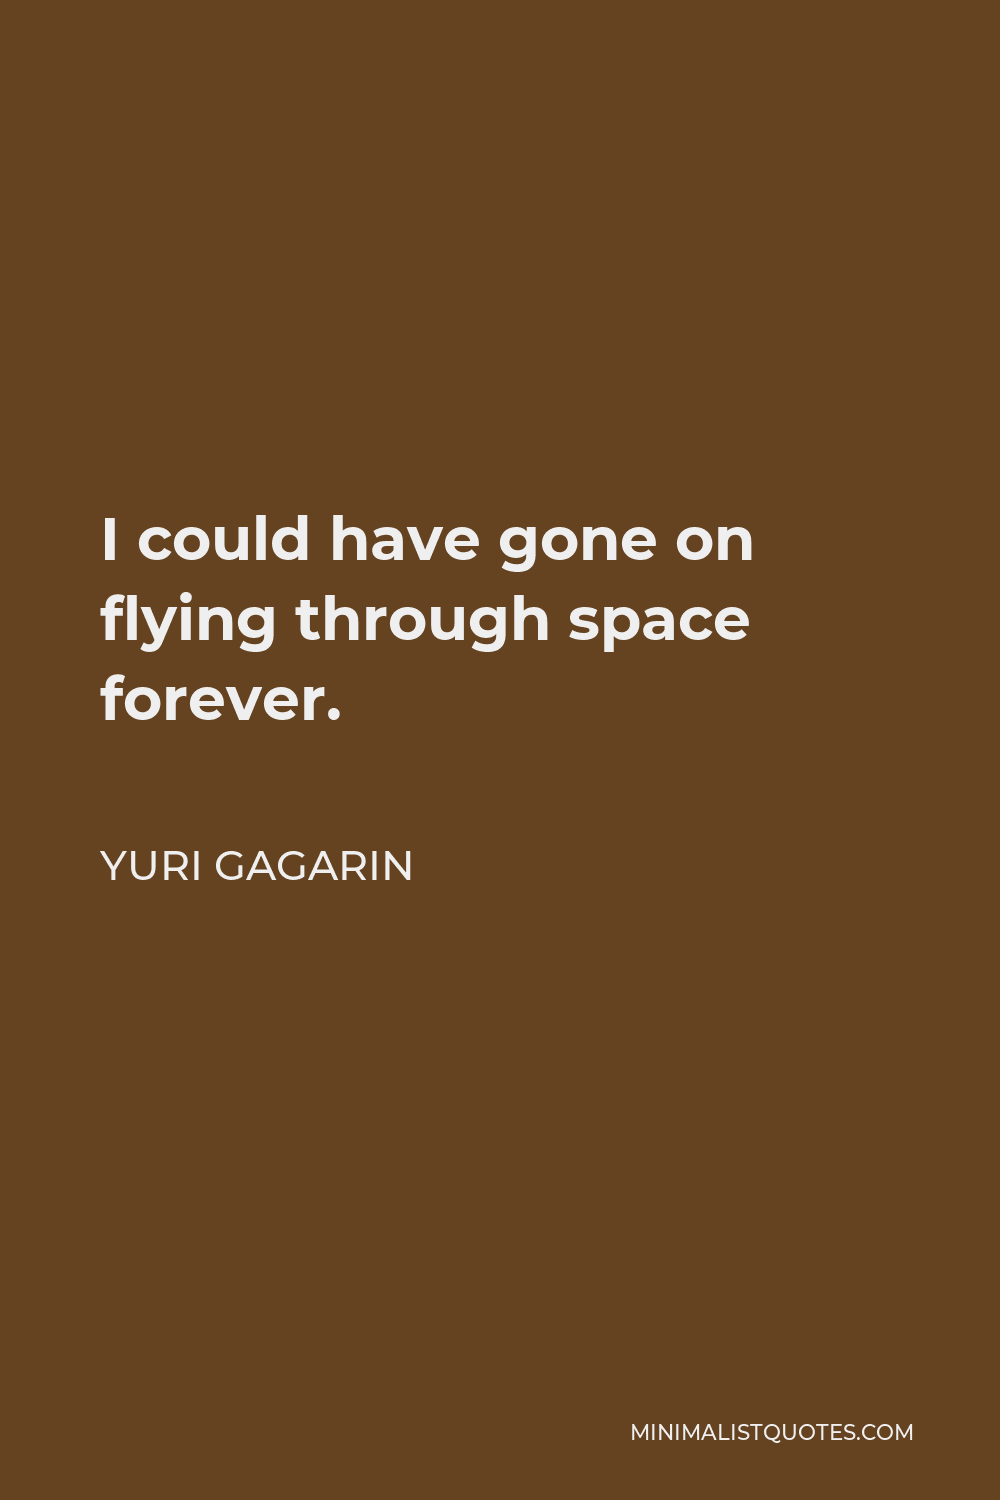 Yuri Gagarin Quote - I could have gone on flying through space forever.